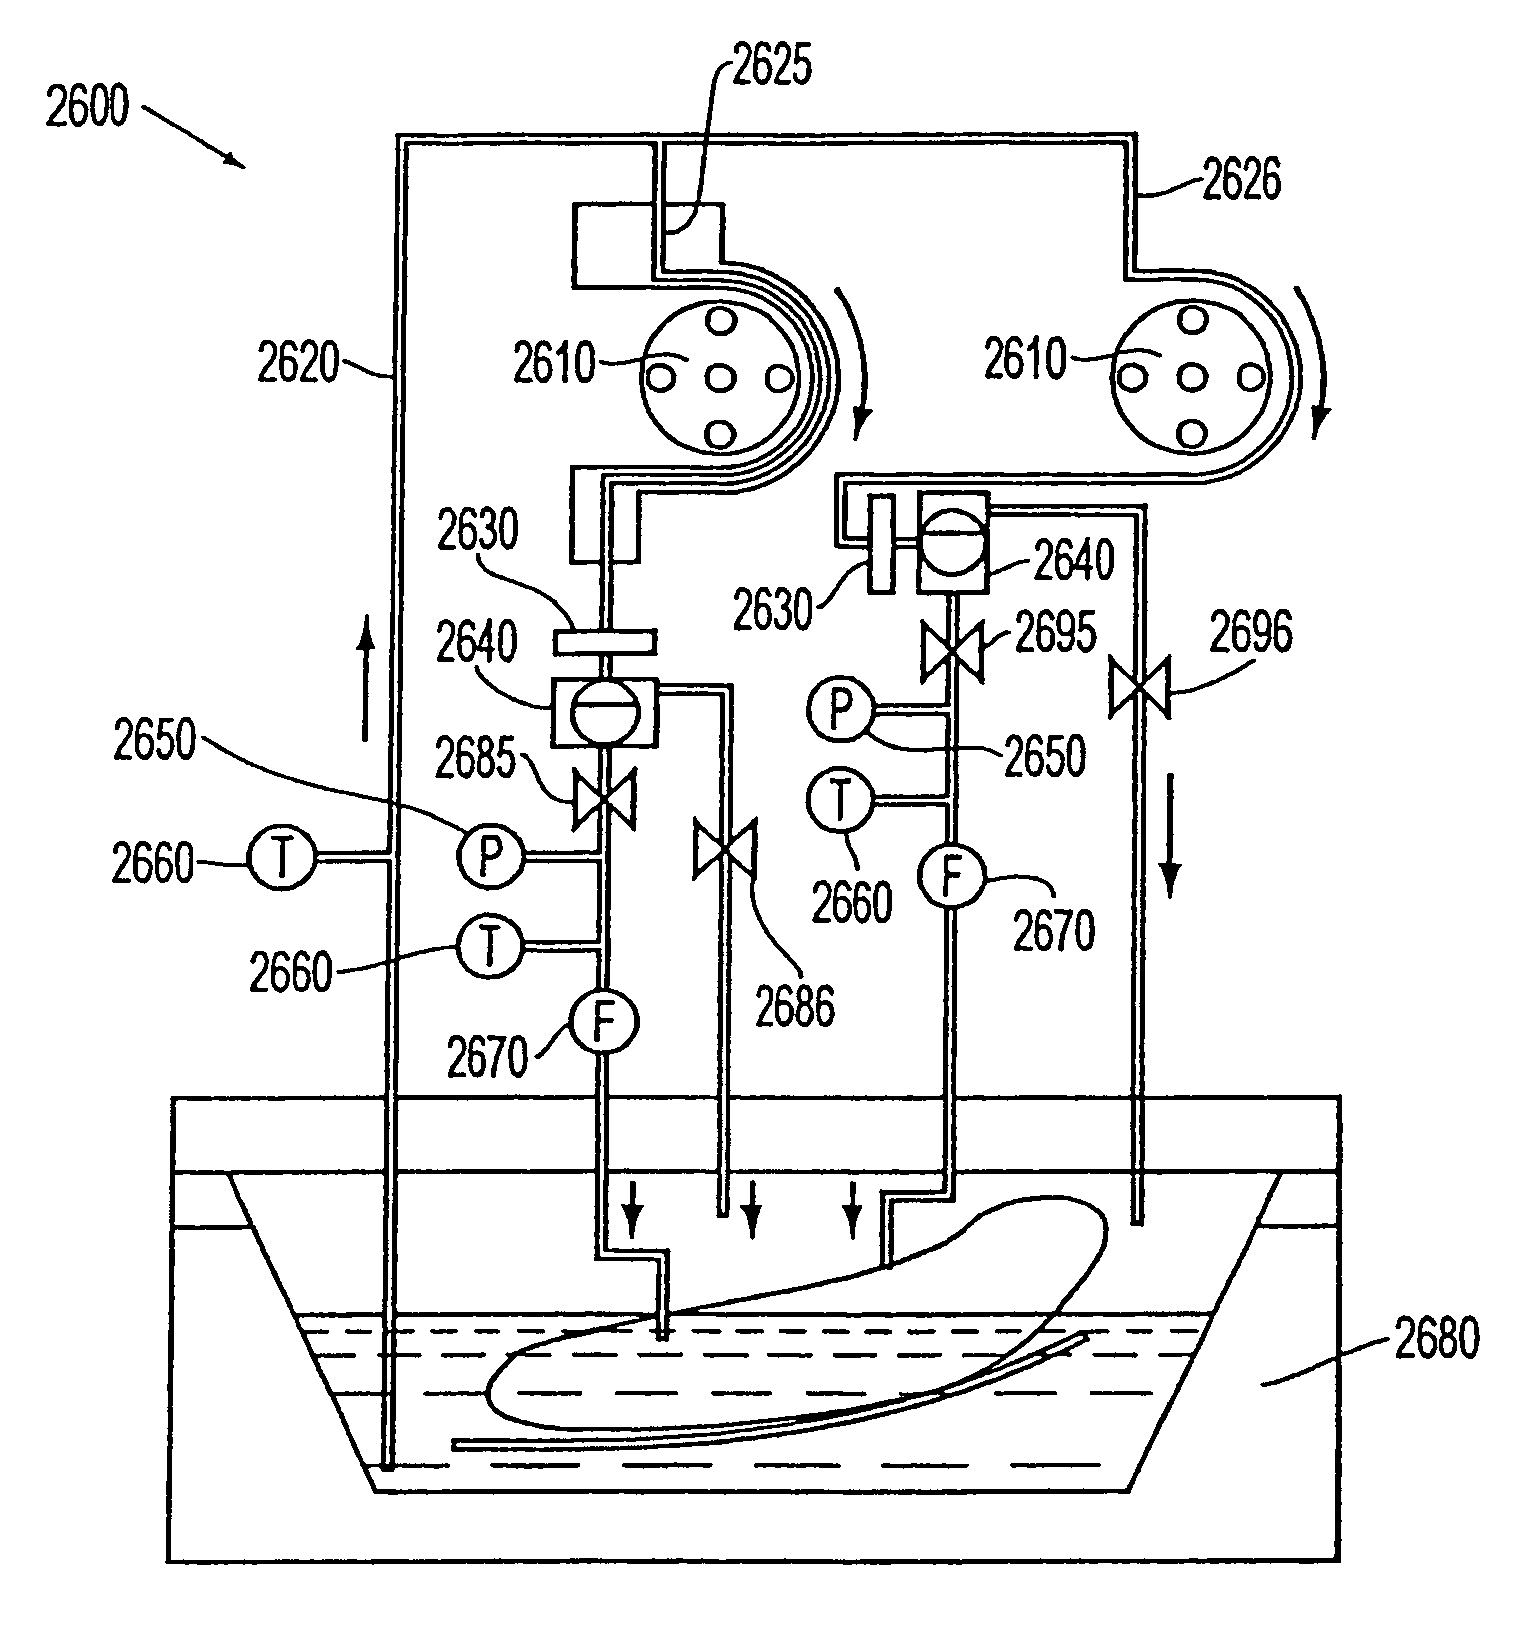 Apparatus and method for maintaining and/or restoring viability of organs